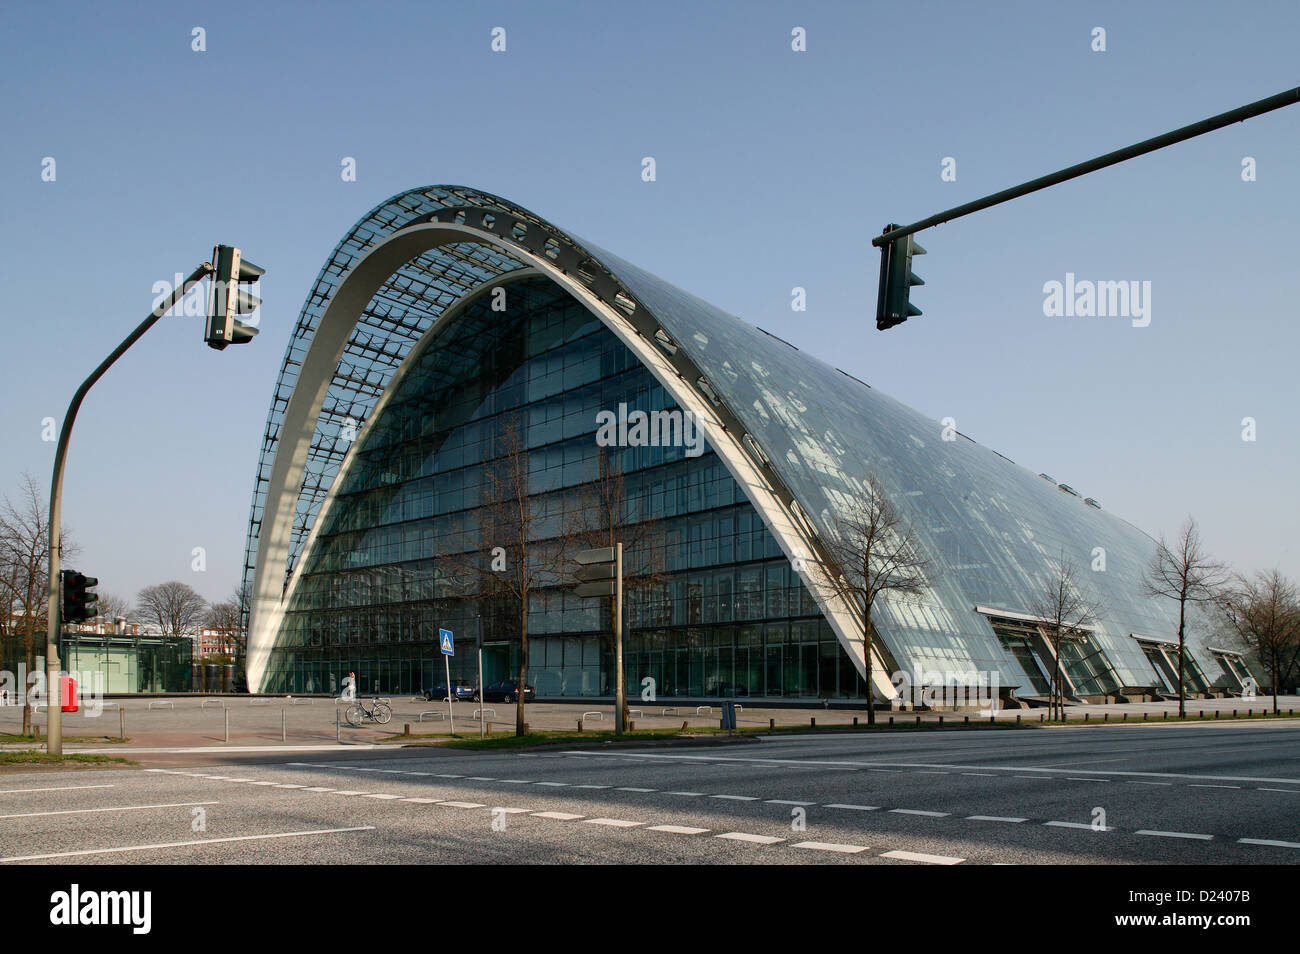 Kai Richter High Resolution Stock Photography and Images - Alamy